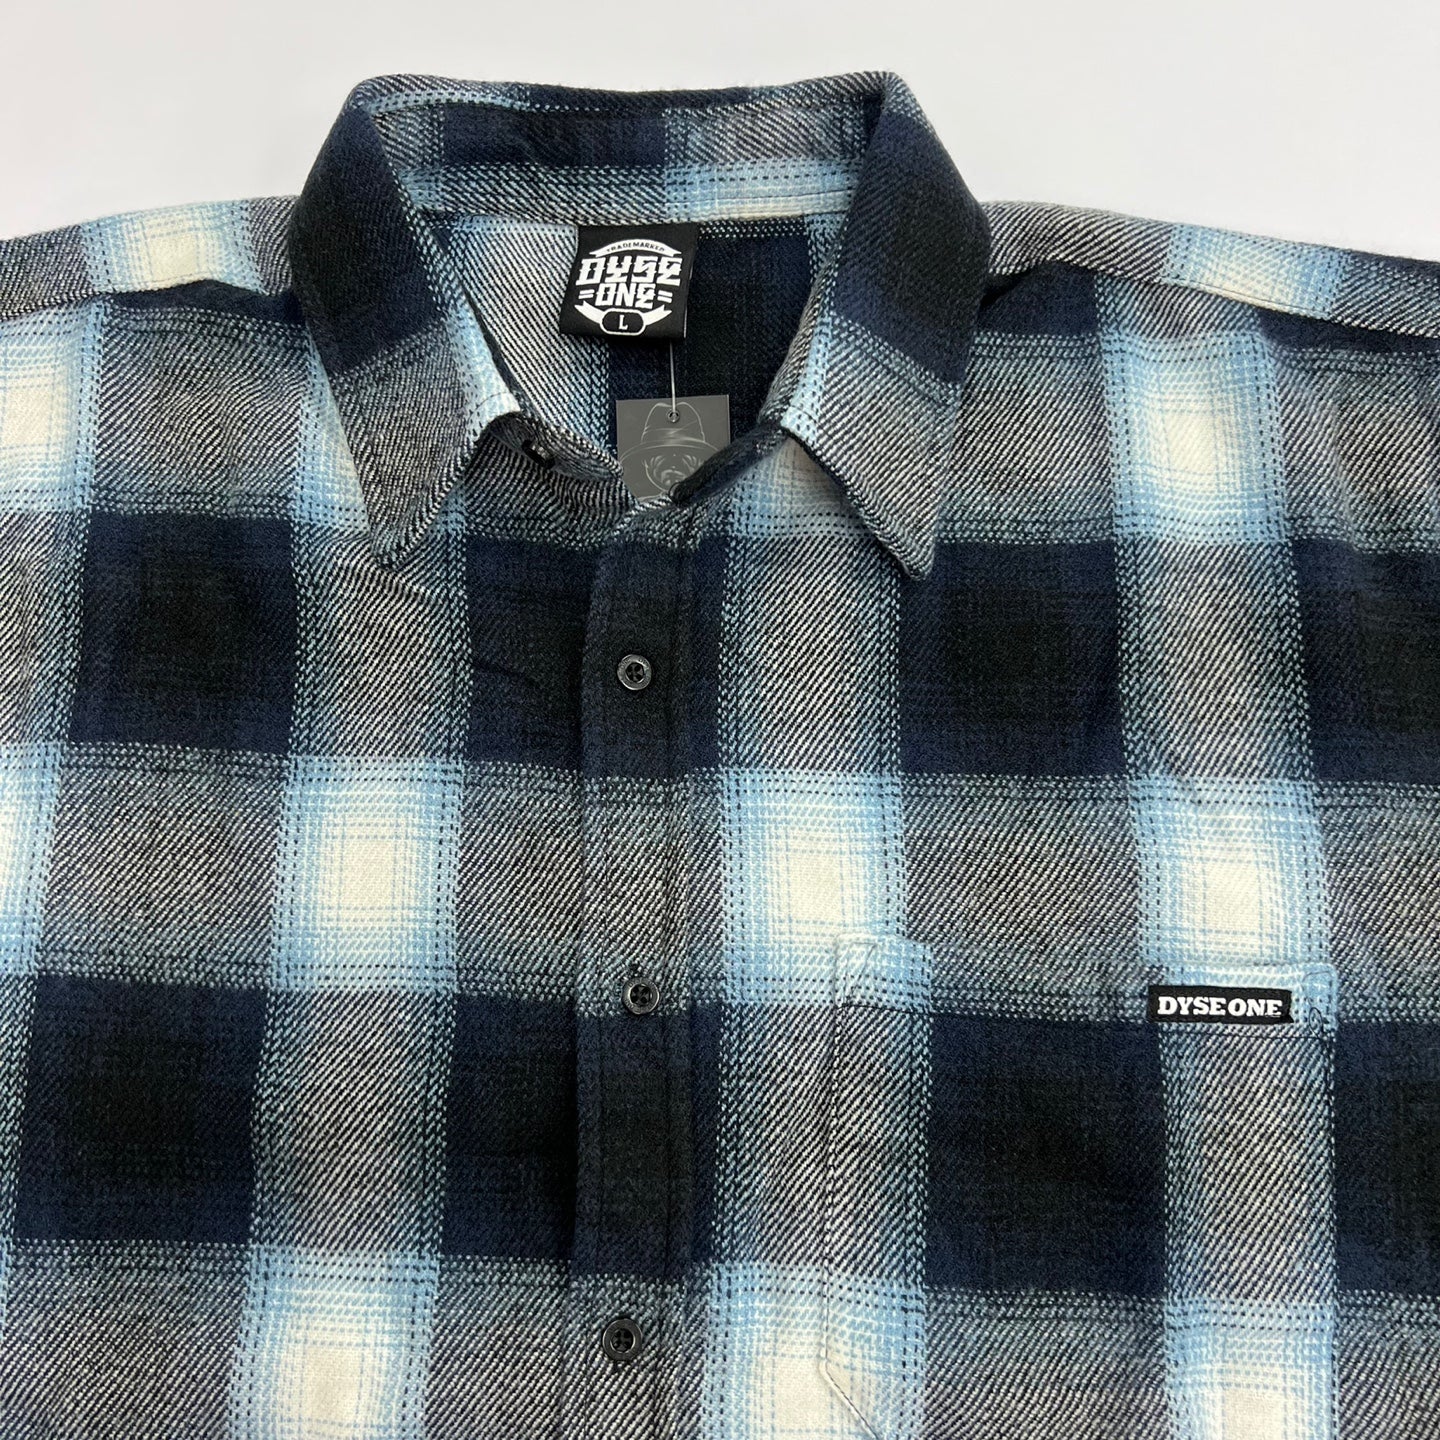 DYSEONE Heavyweight Button Down Flannel Shirts